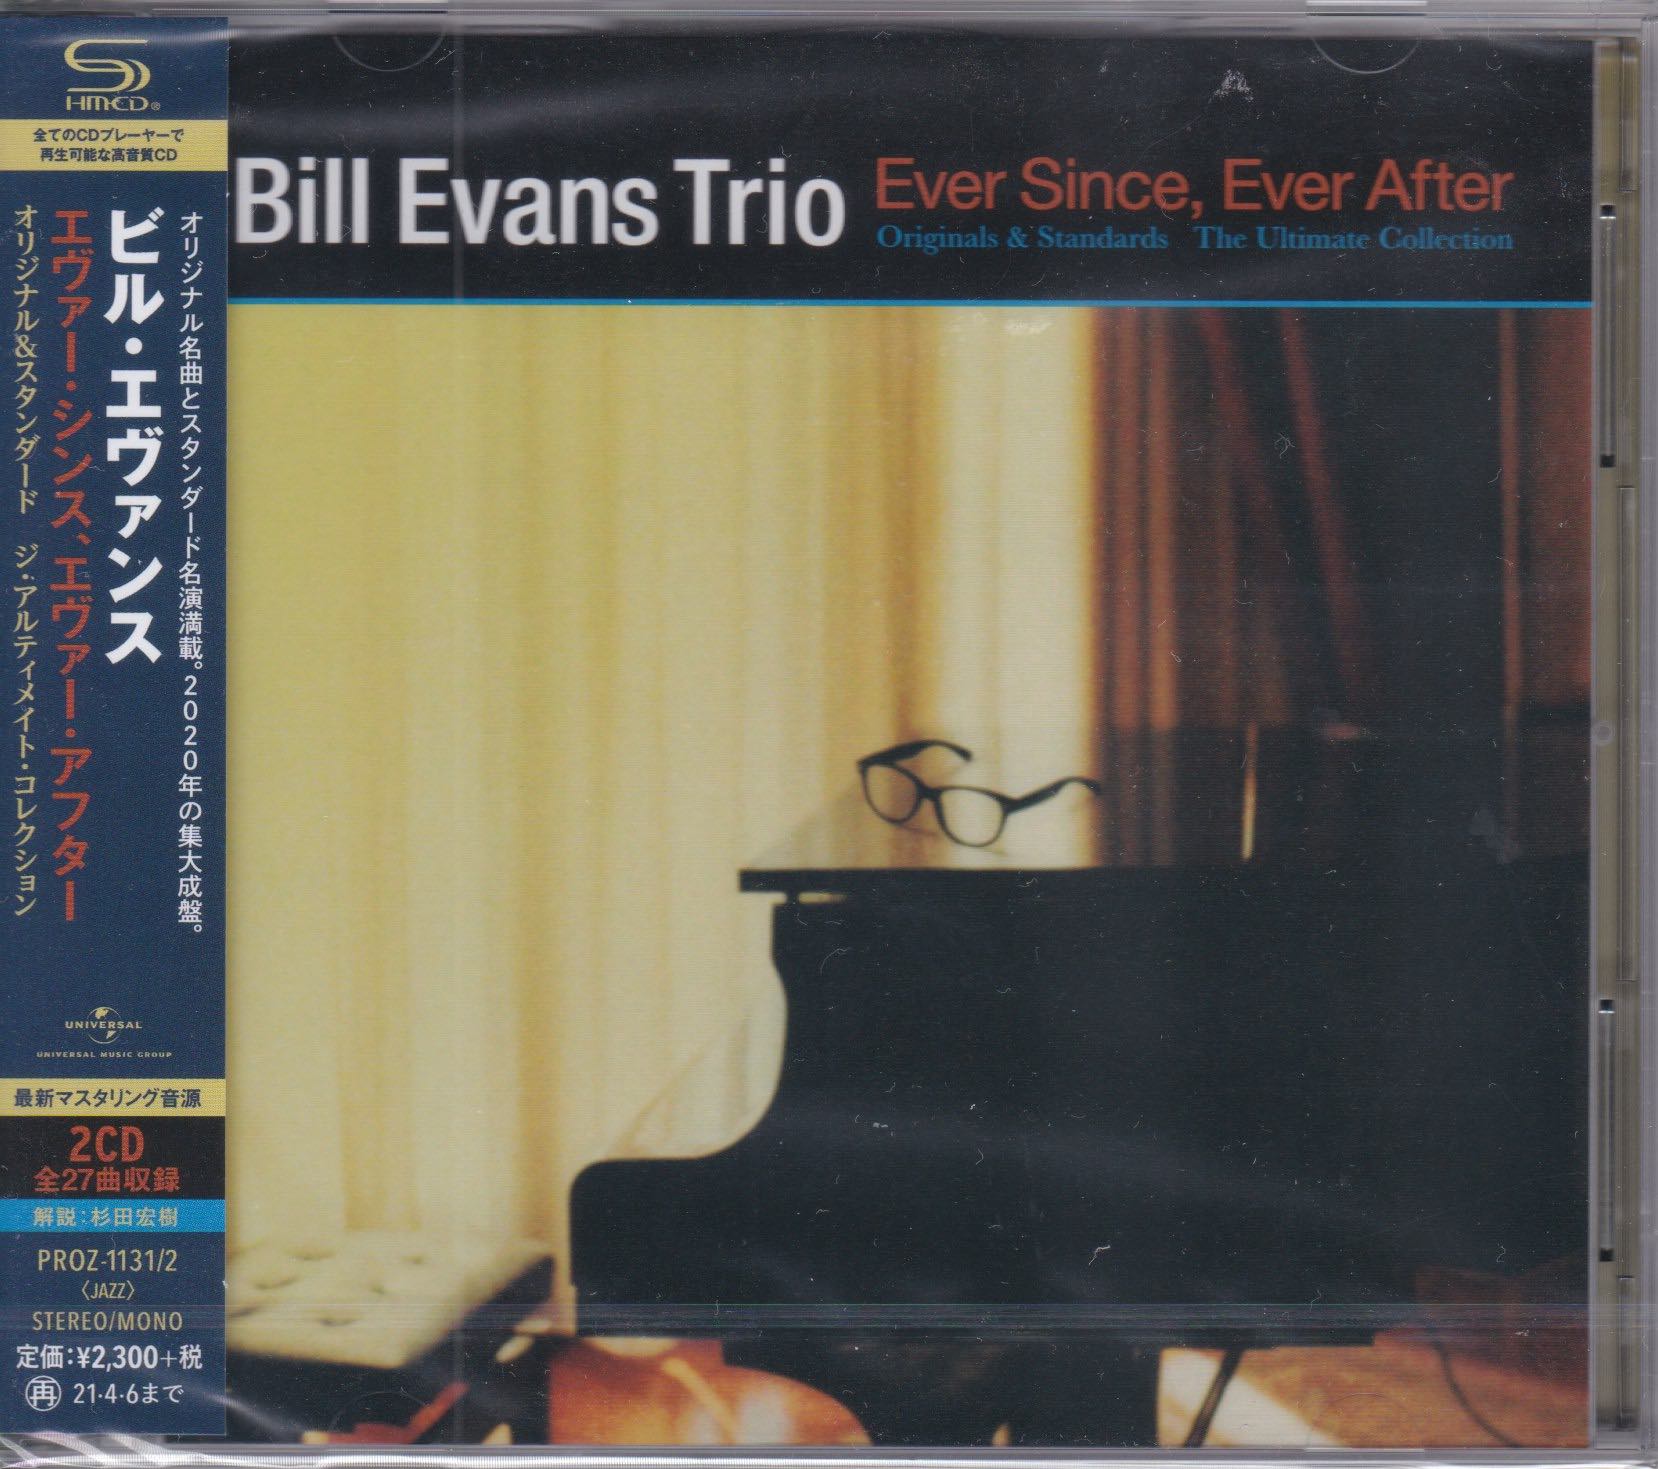 Bill Evans Trio ‎– Ever Since, Ever After (Originals & Standards - The Ultimate Collection)